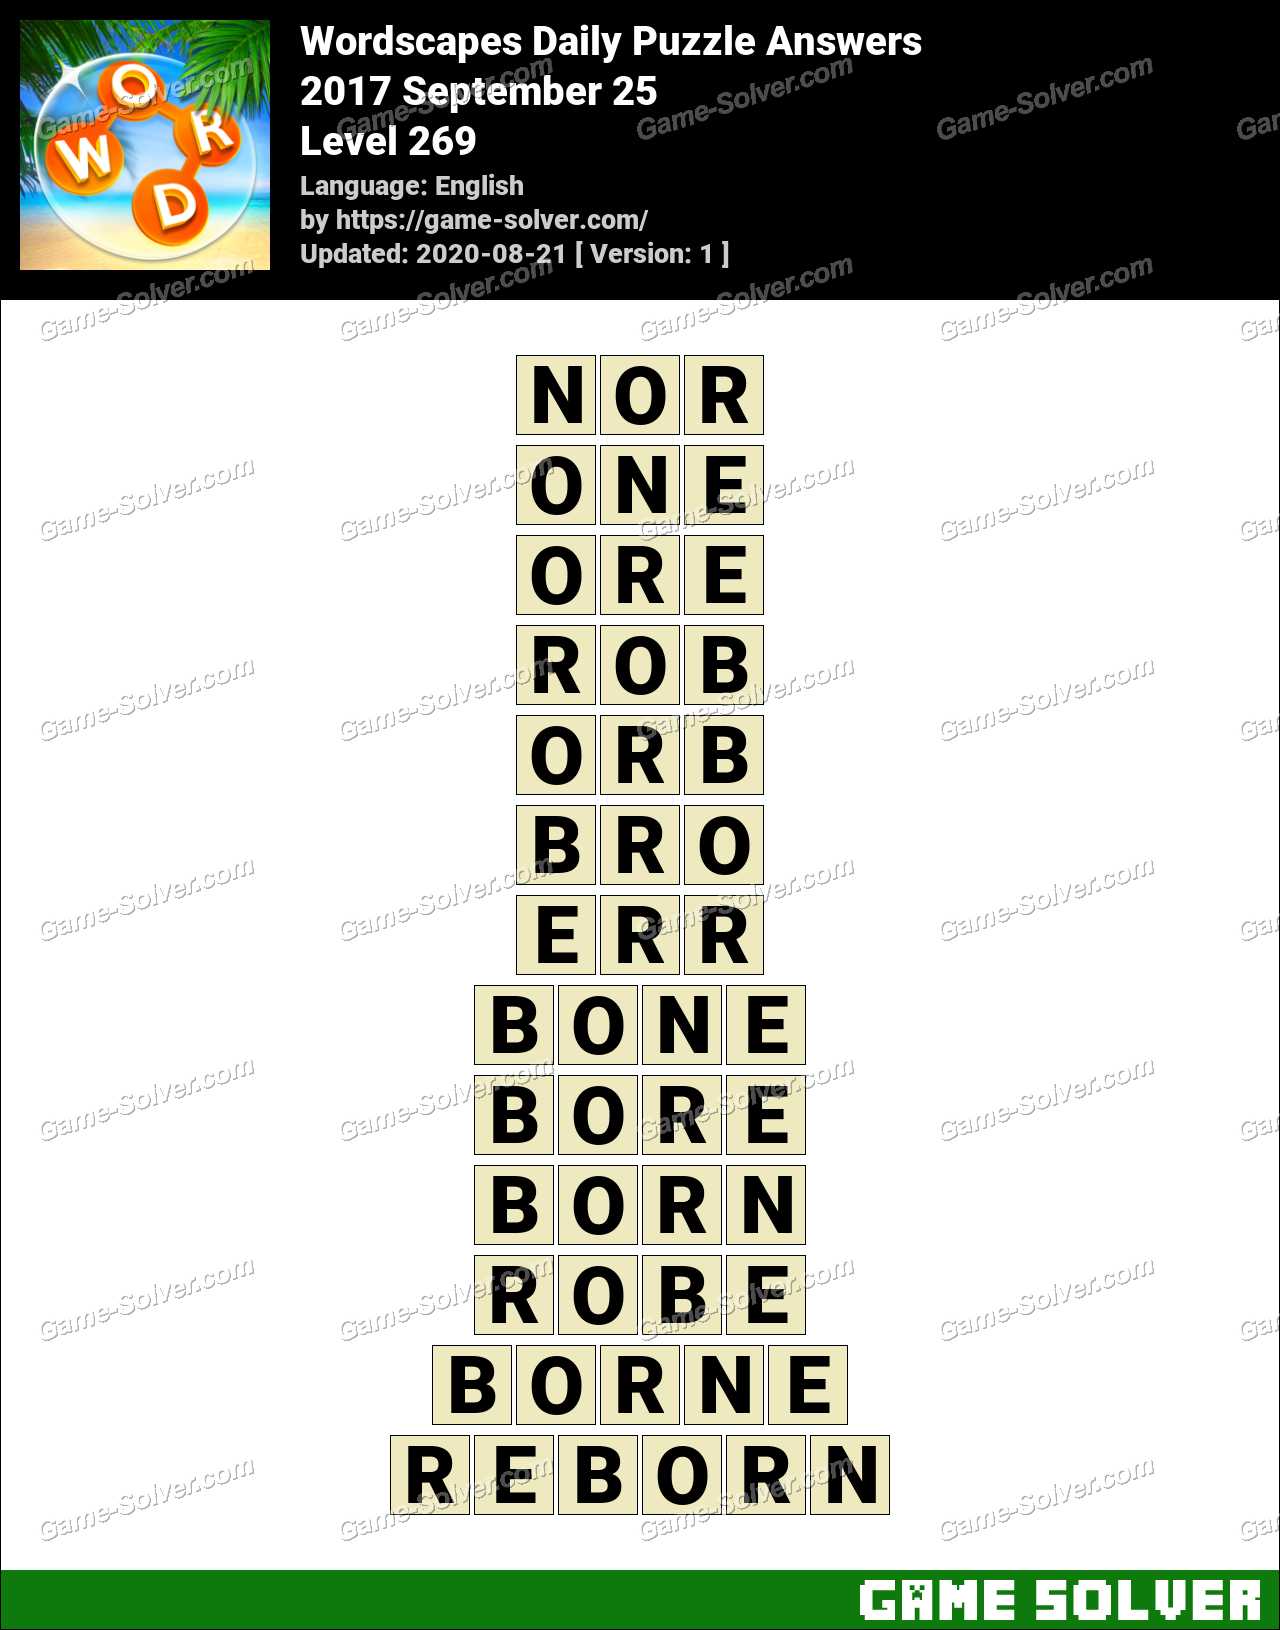 Wordscapes Daily Puzzle 17 September 25 Answers Game Solver